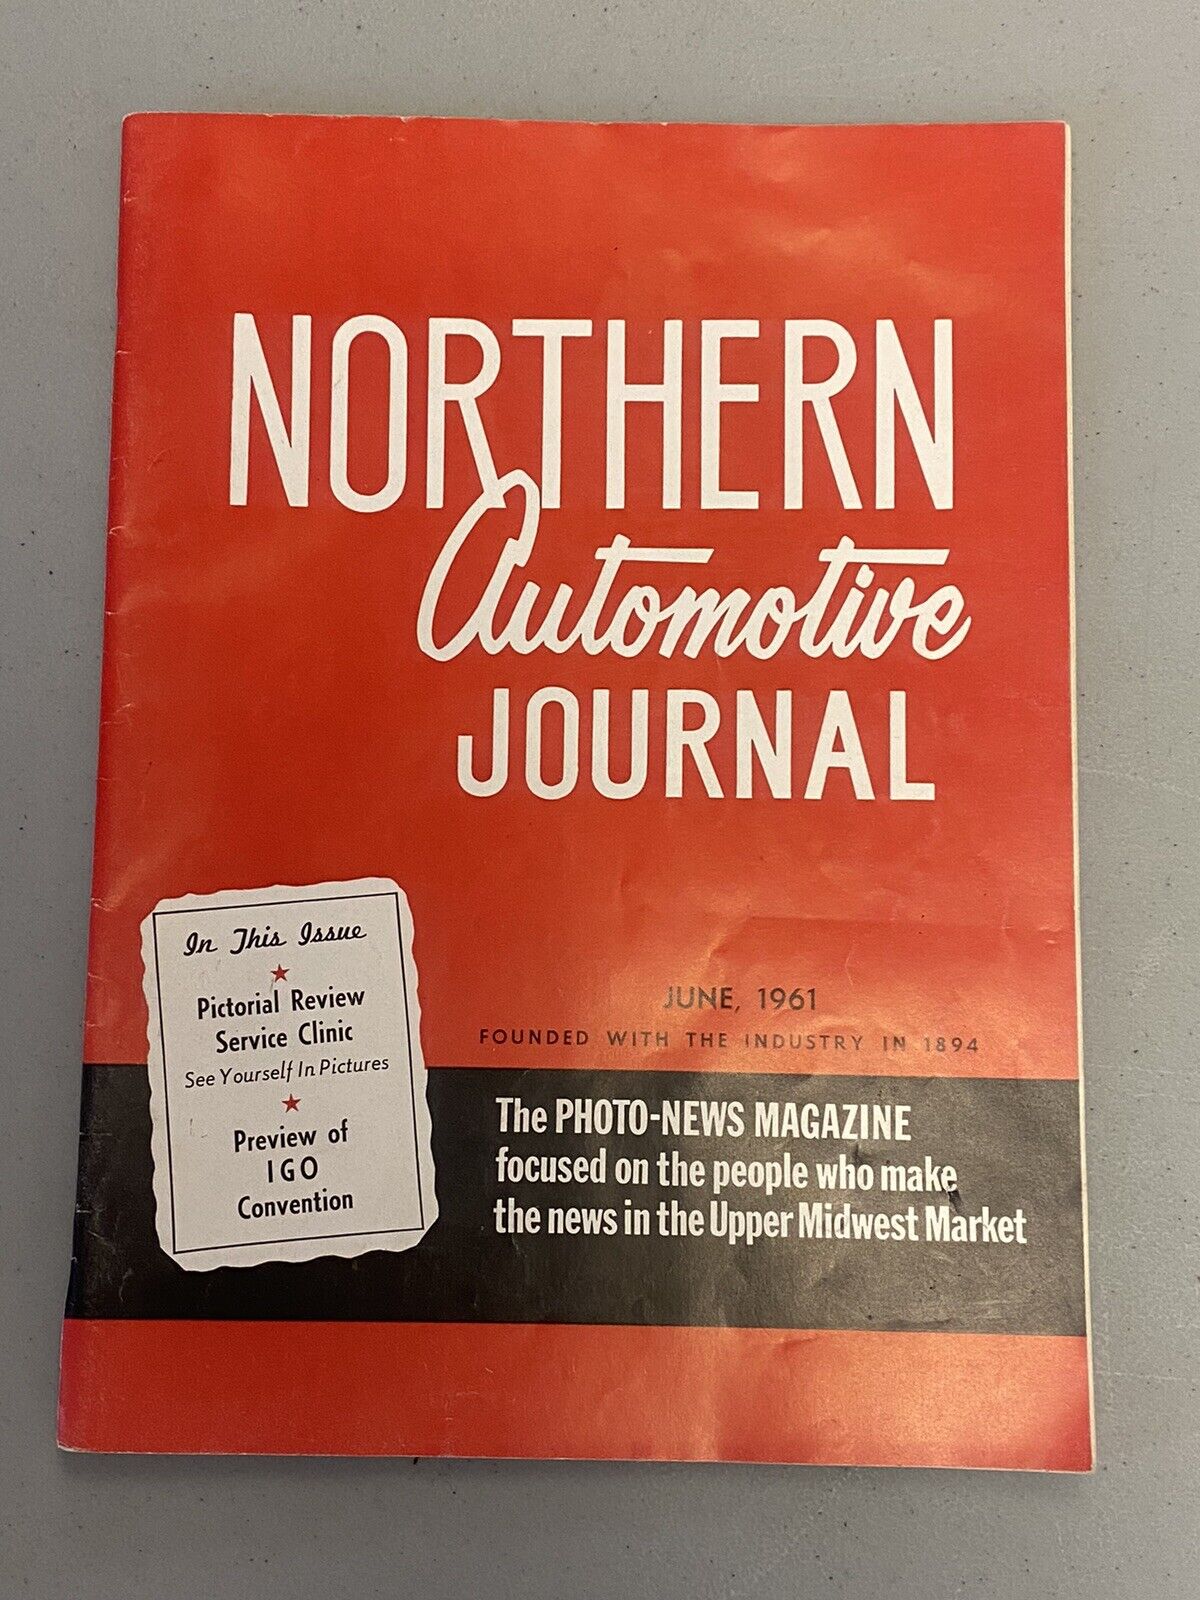 Vintage June 1961 Northern Automotive Journal - Pictorial Review Service Clinic